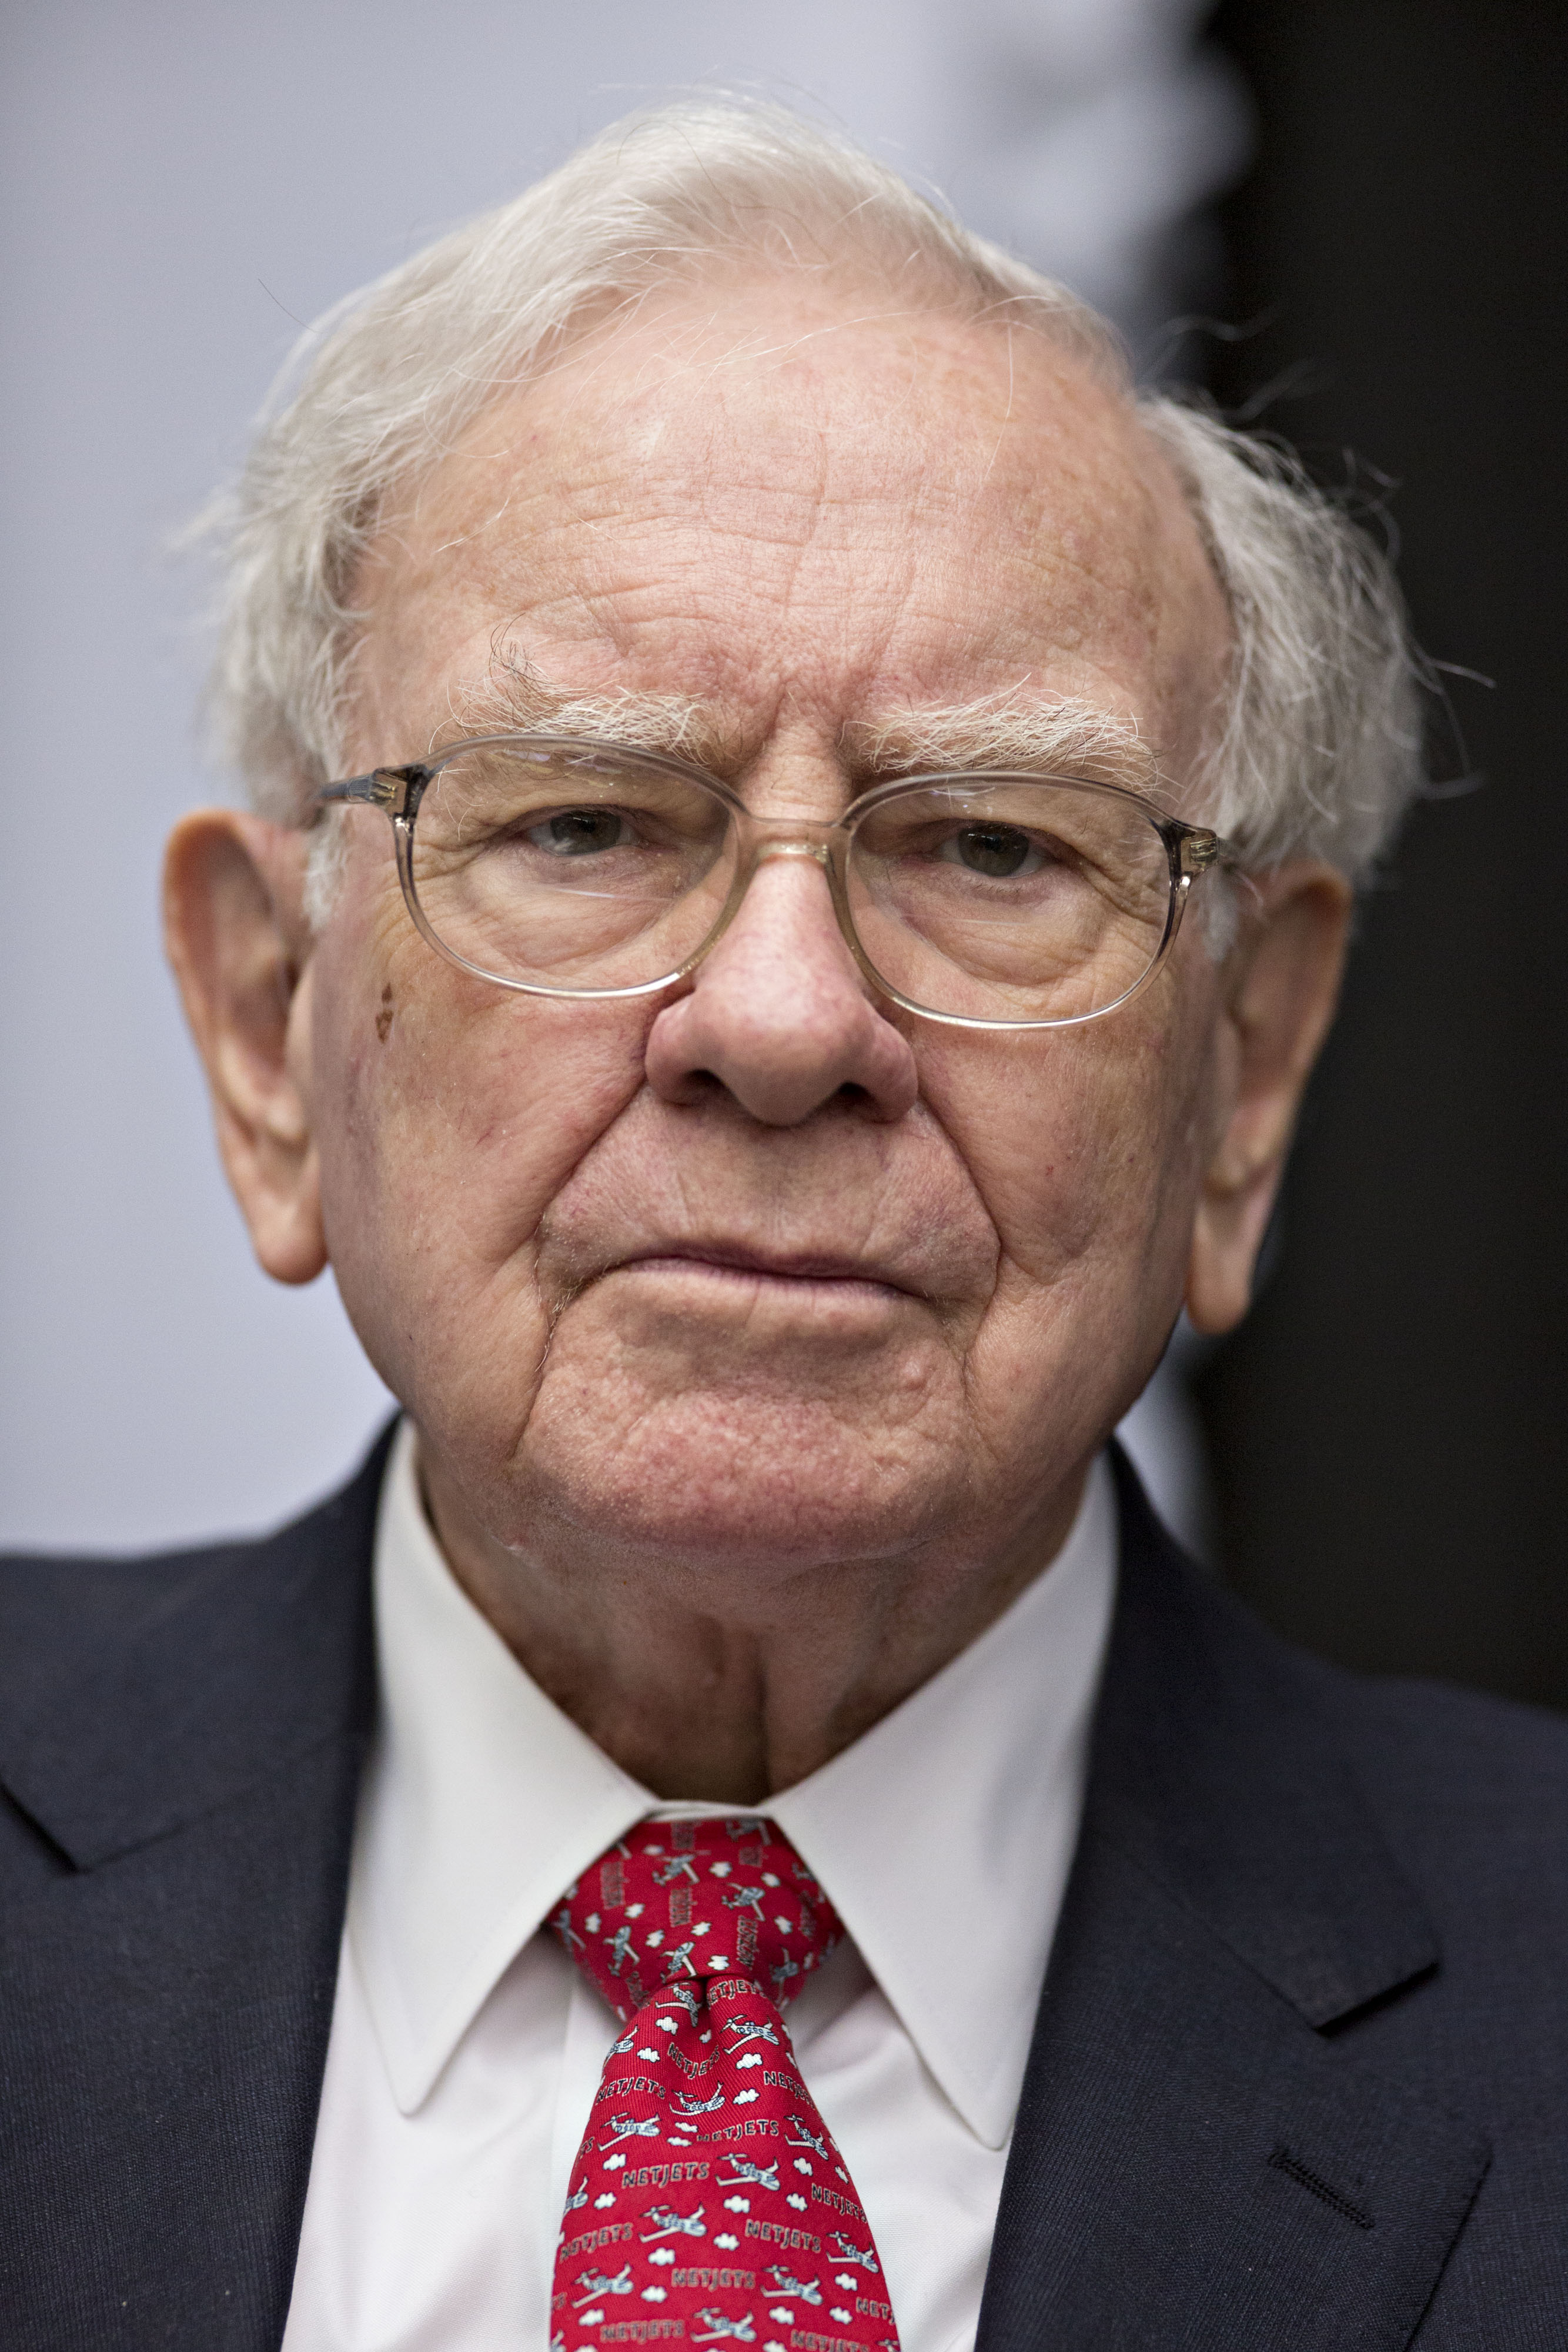 Why Warren Buffett's Sweet Dow Chemical Payouts Might End